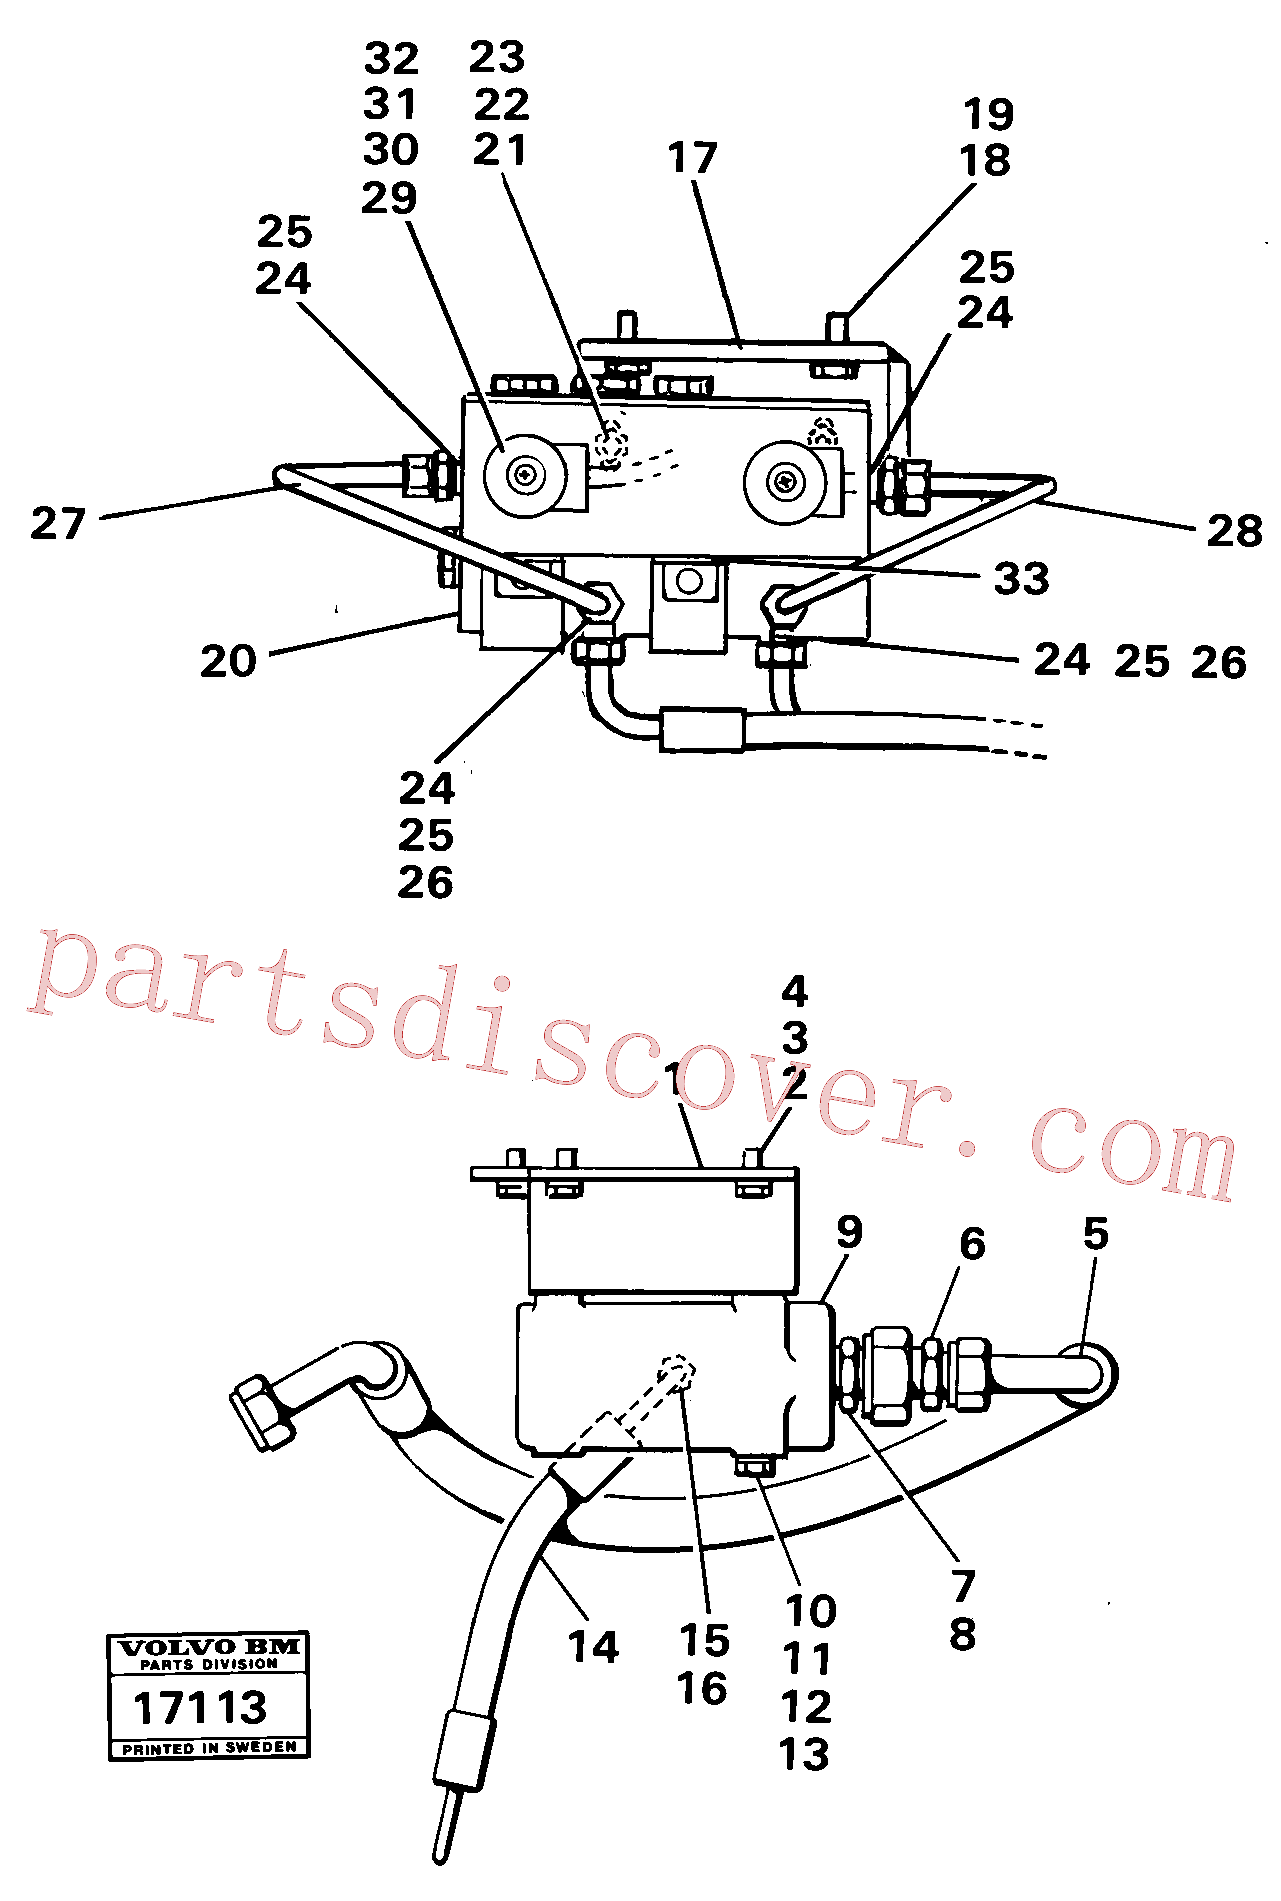 VOE13963958 for Volvo Valves with connections 99393 Tillv.nr 2224-(17113 assembly)